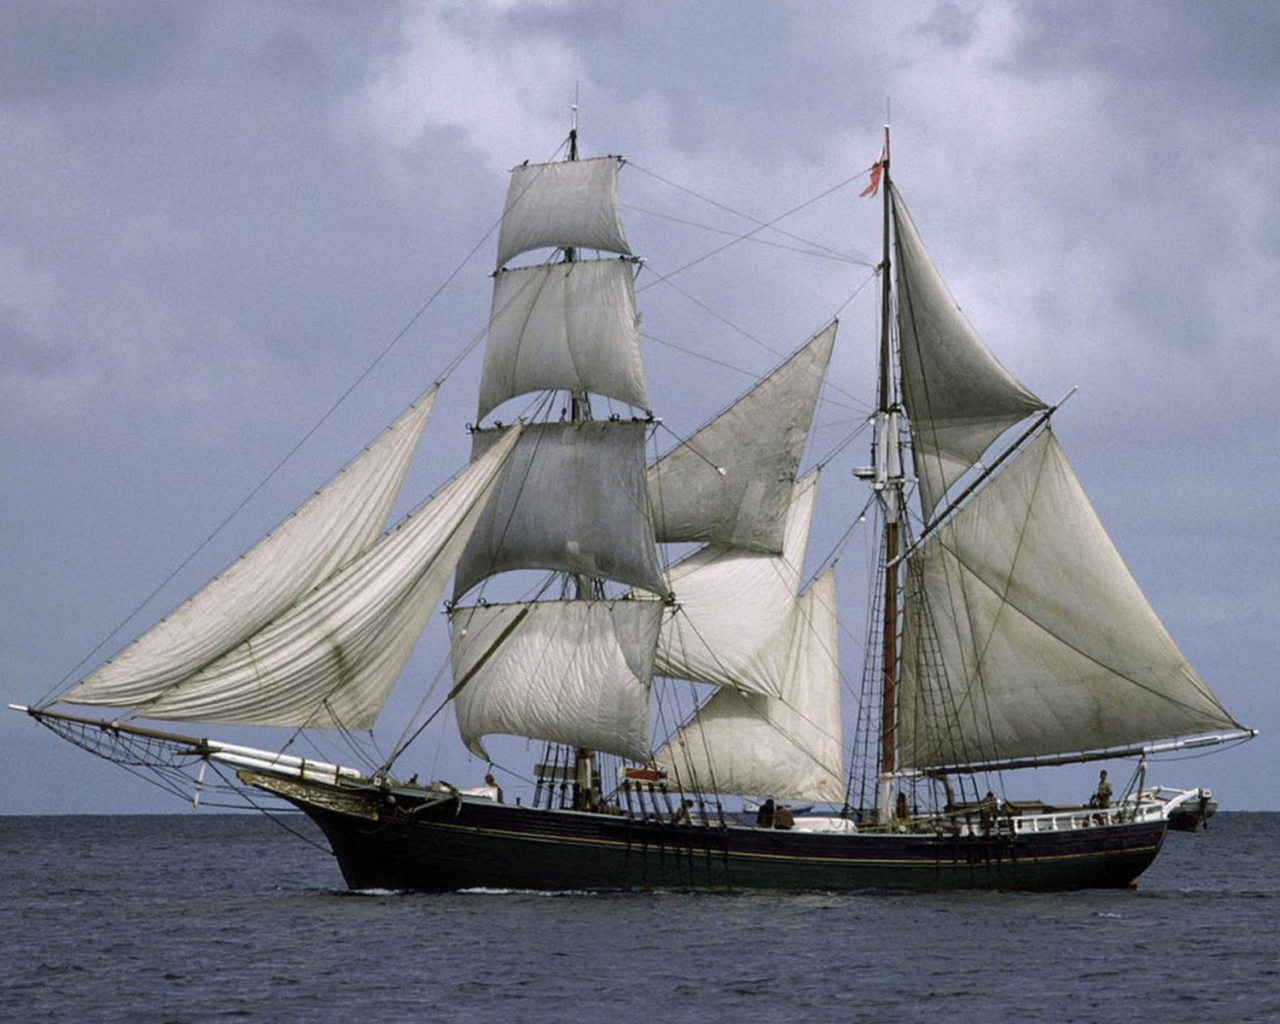 A ship with white sails in the sea